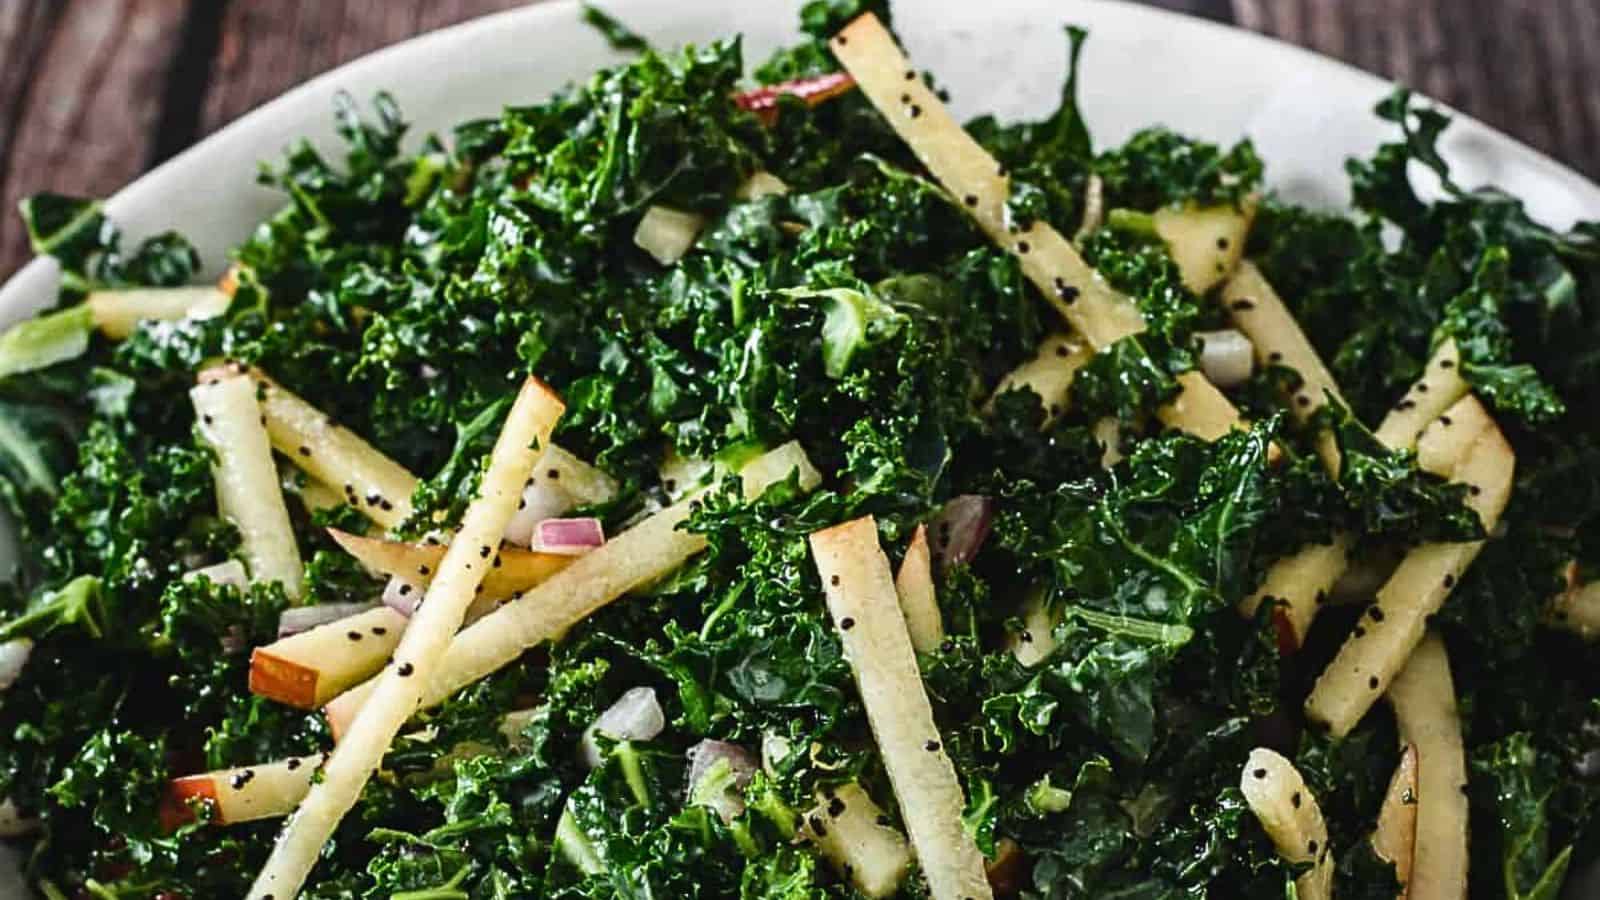 A bowl of kale salad on a wooden table.